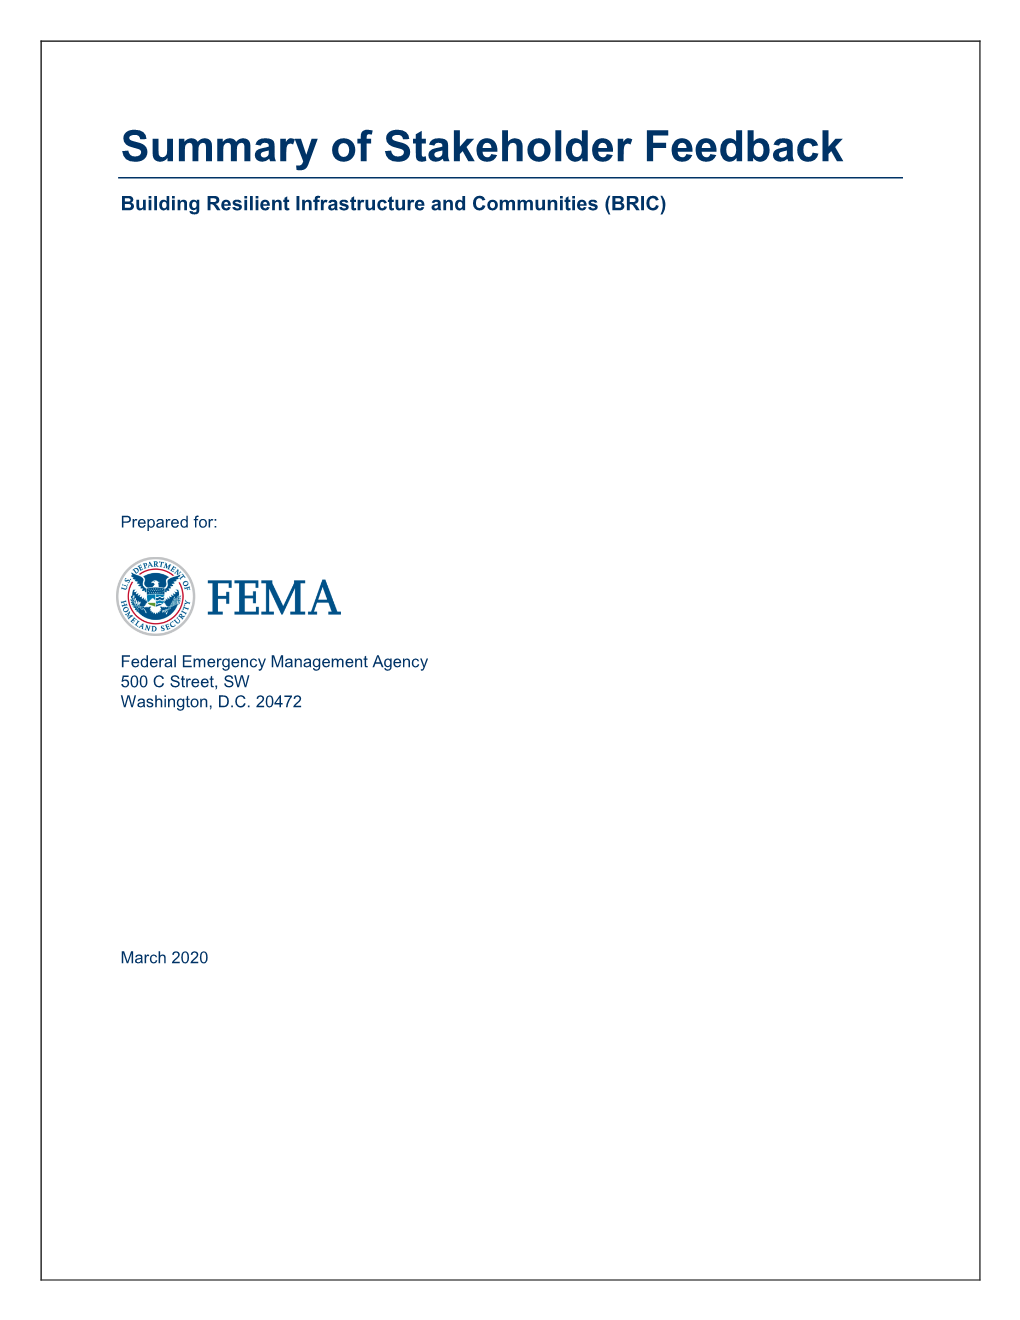 Summary of Stakeholder Feedback, Building Resilient Infrastructure and Communities (BRIC)